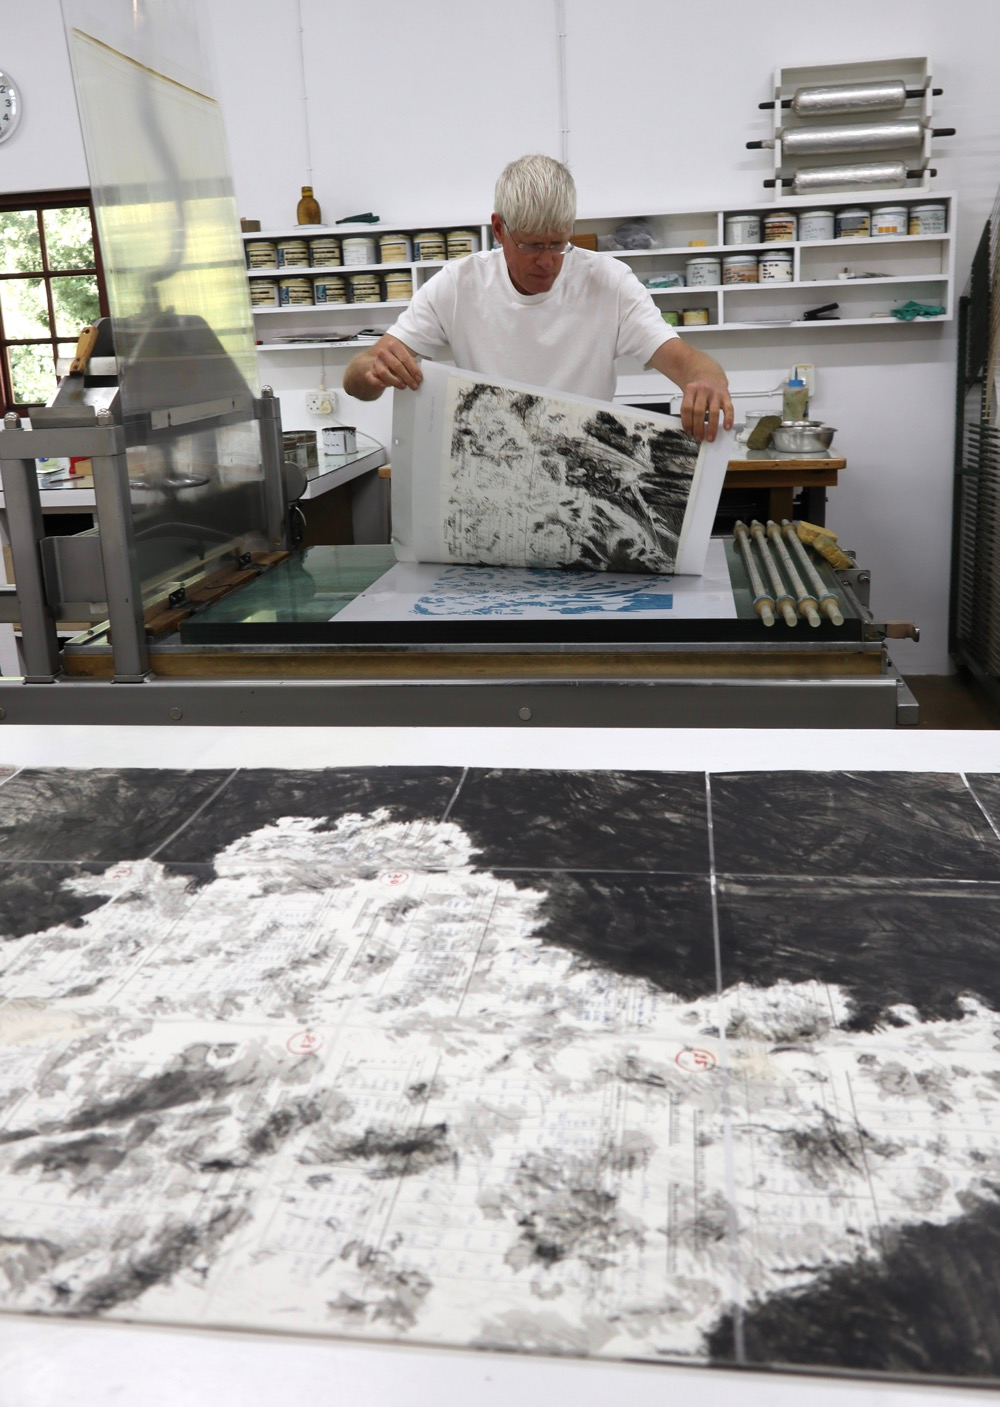 Mark Attwood hand printing a limited edition lithograph by William Kentridge on a lithography press at The Artists' Press.